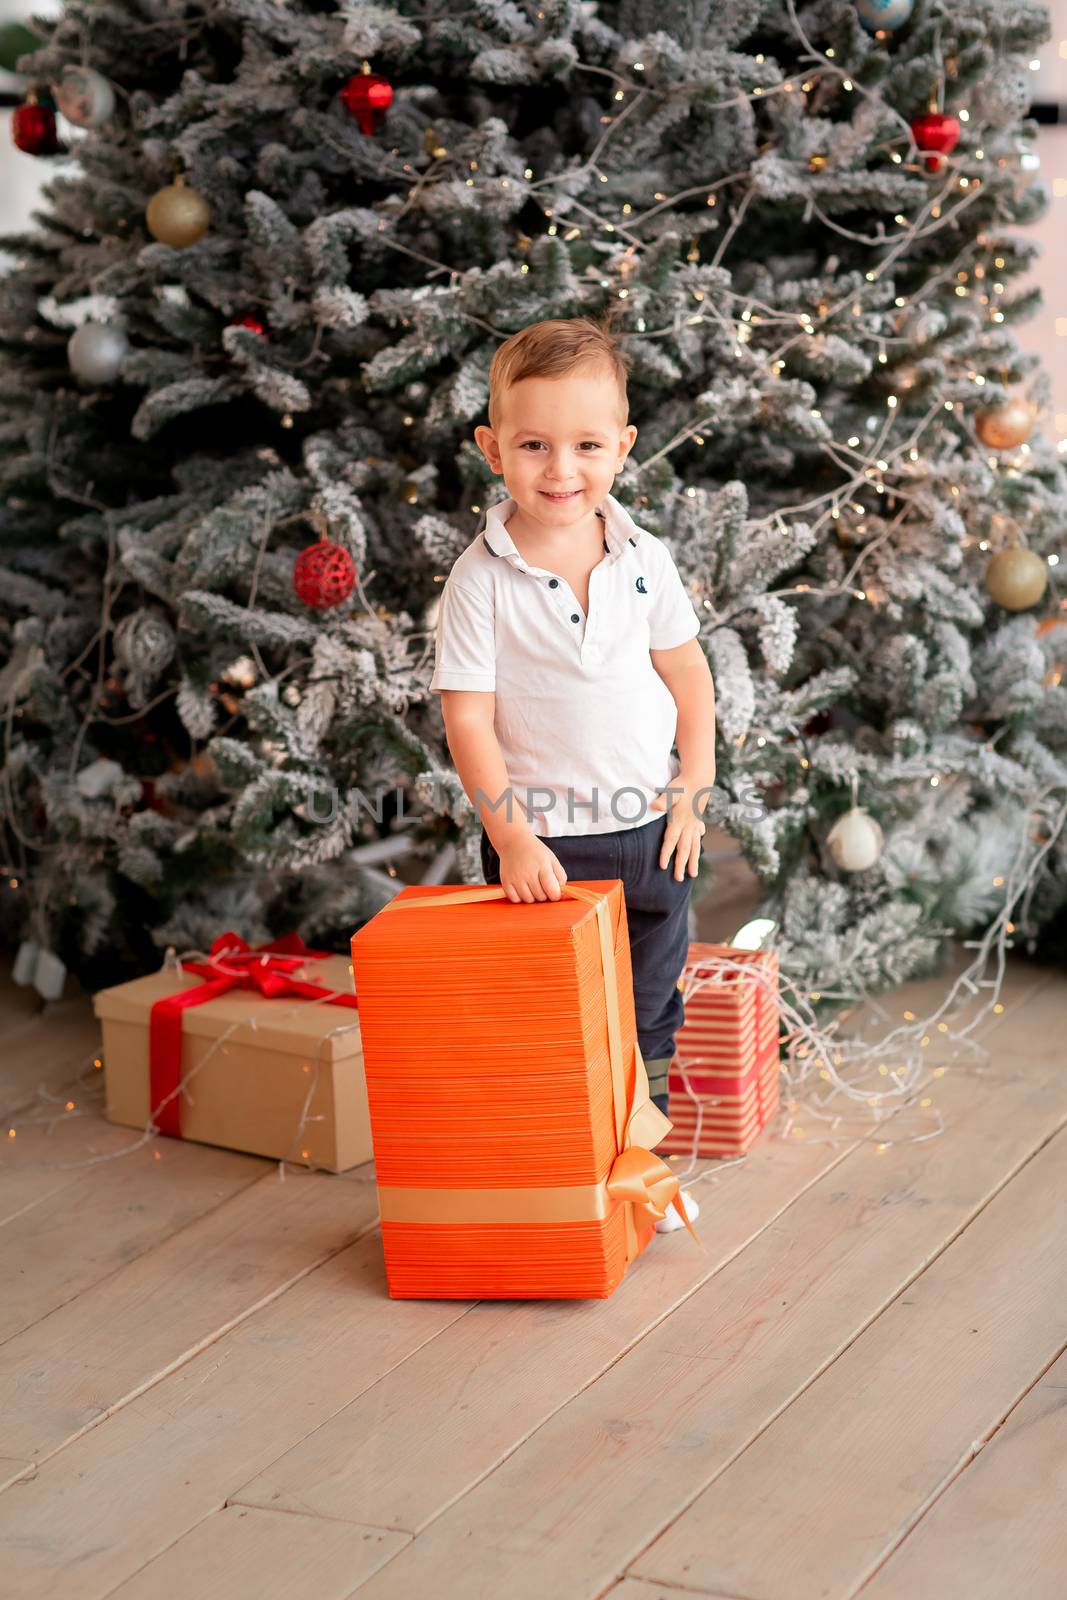 Cheerful cute baby boy with gifts. Kid holding big present and having fun near tree in the morning. Merry Christmas and Happy Holidays concept